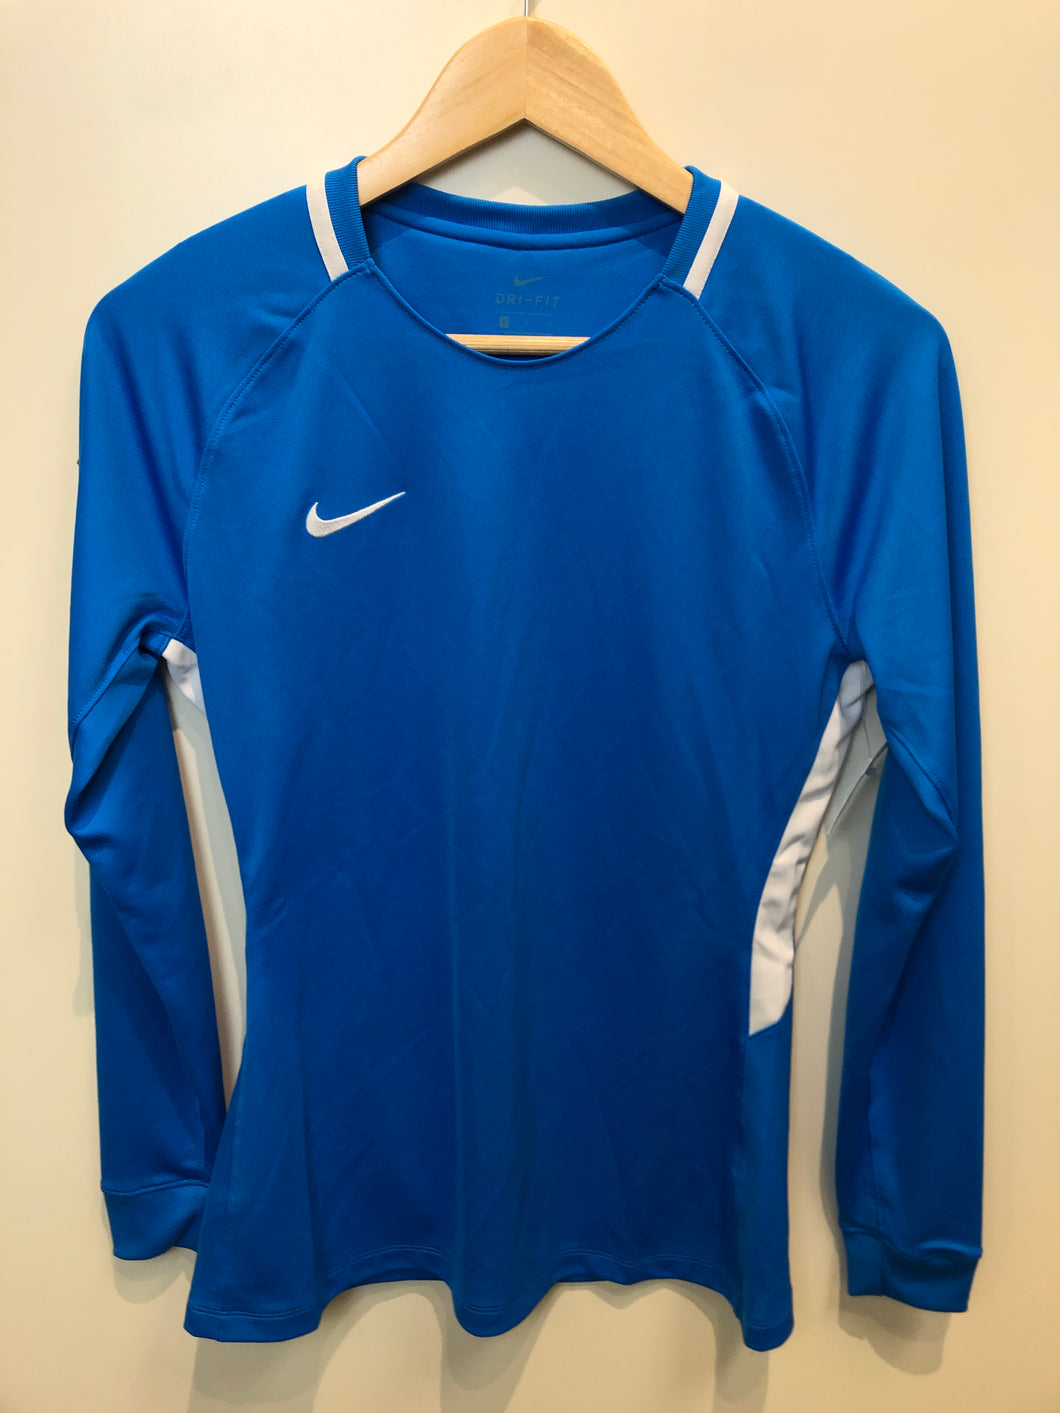 Nike Dri Fit Athletic Top Size Small